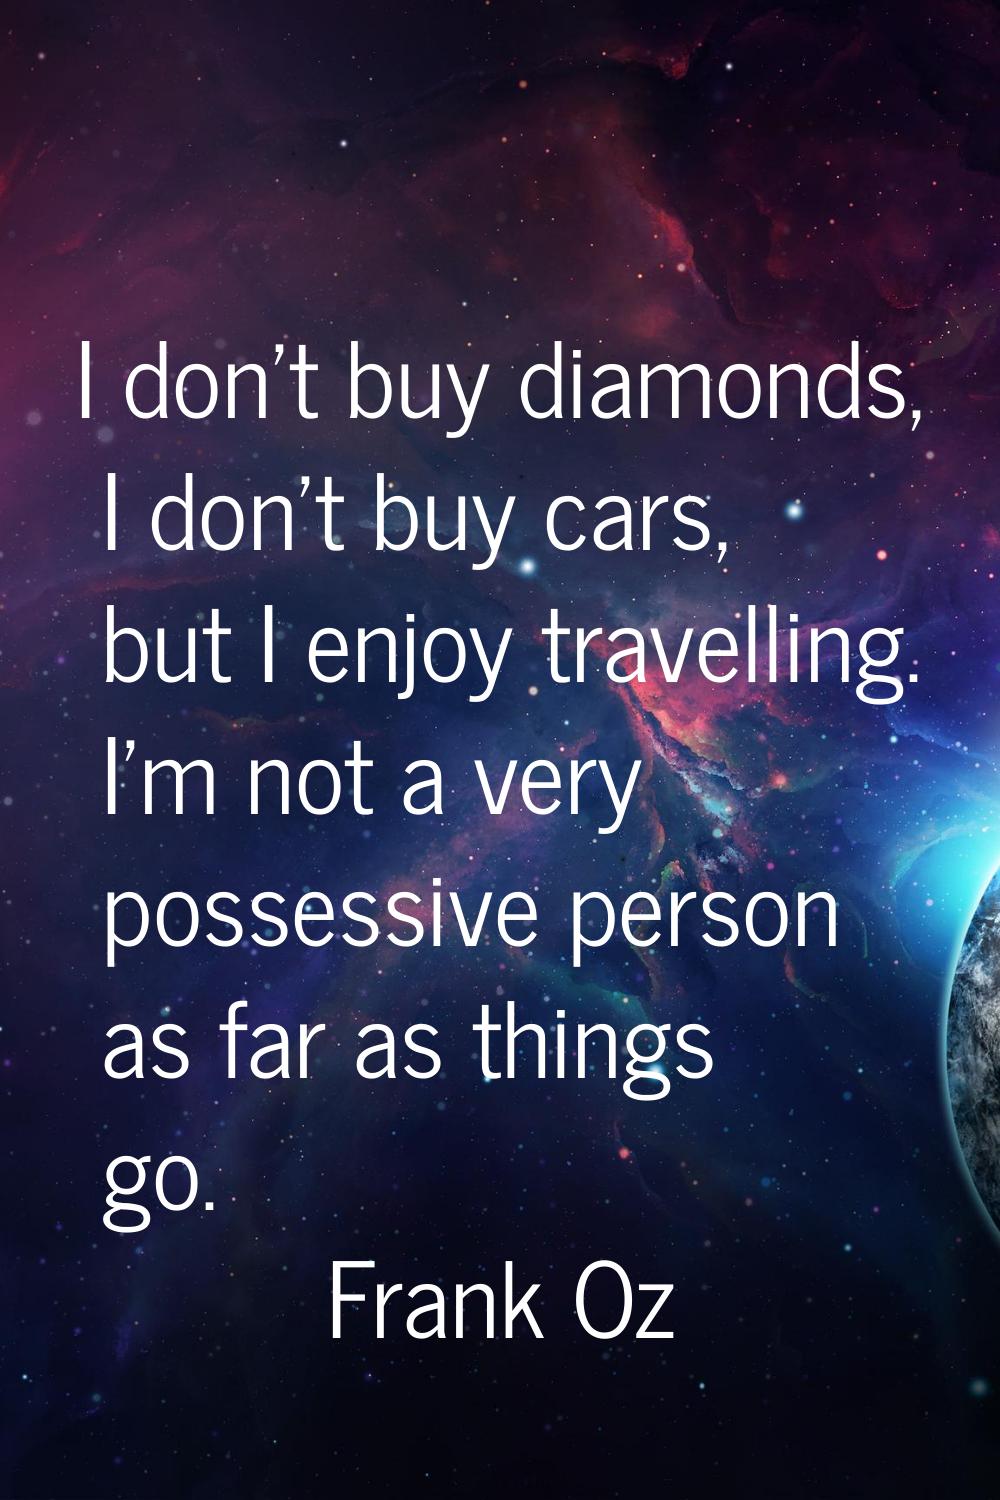 I don't buy diamonds, I don't buy cars, but I enjoy travelling. I'm not a very possessive person as